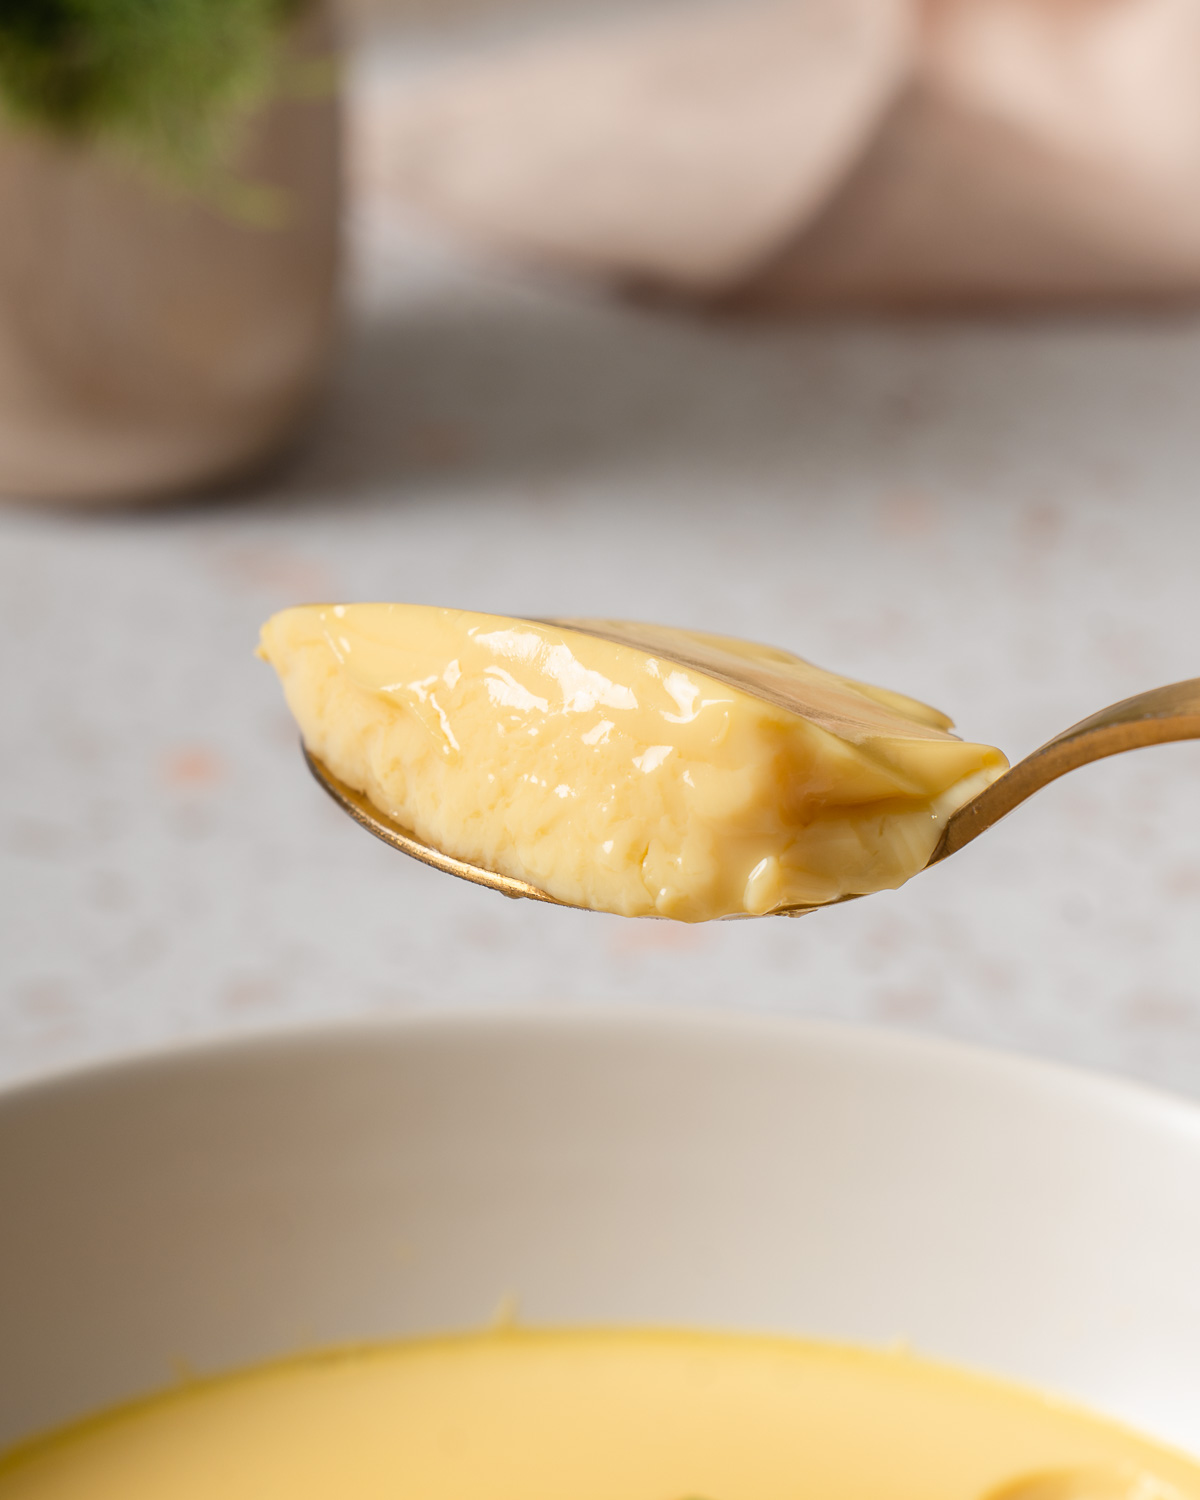 Up close with a spoon of steamed eggs.